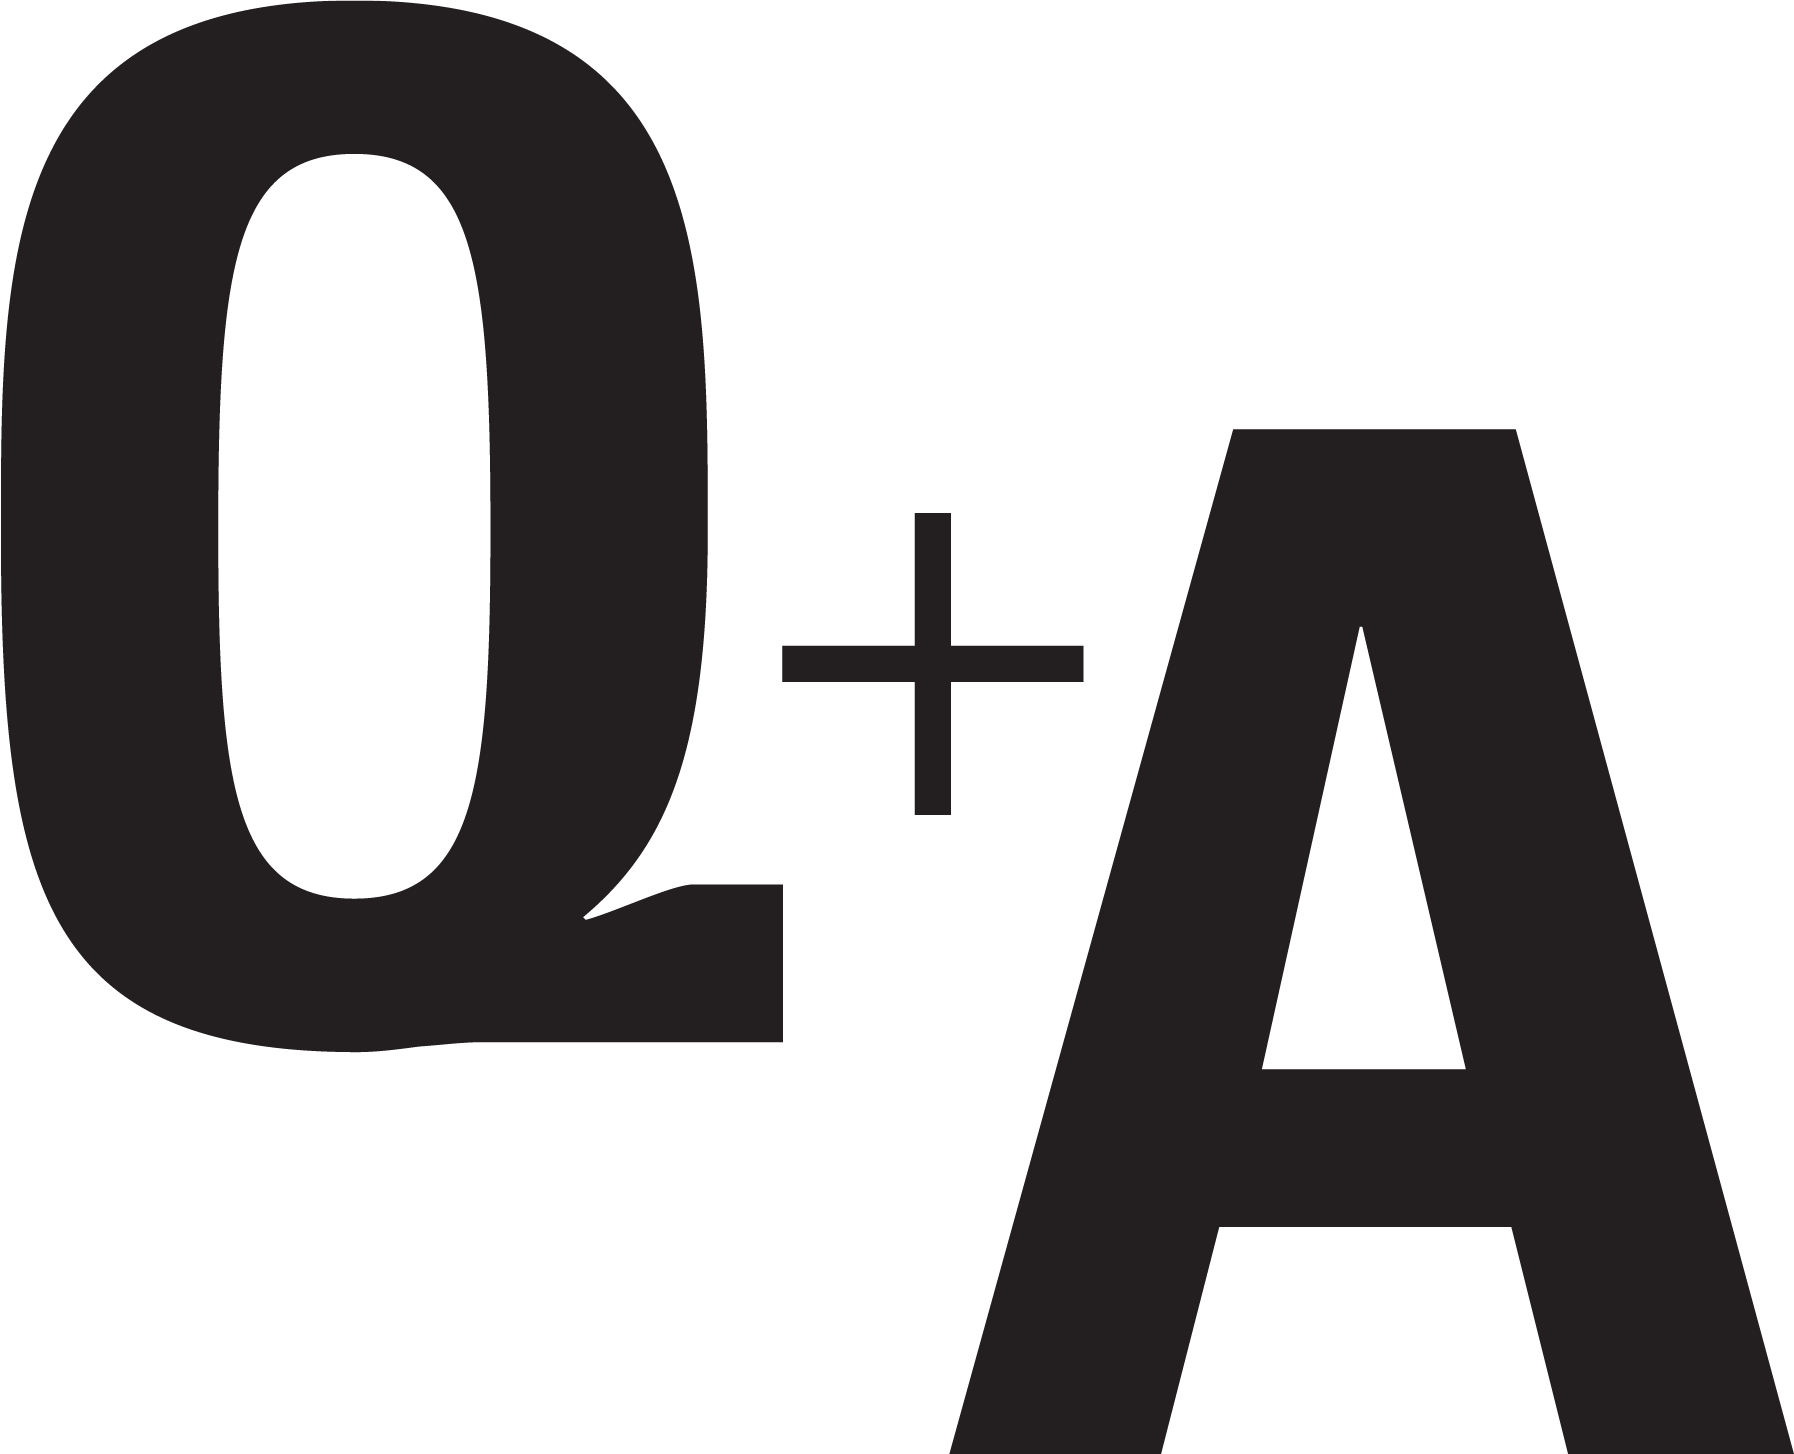 The letters Q+A